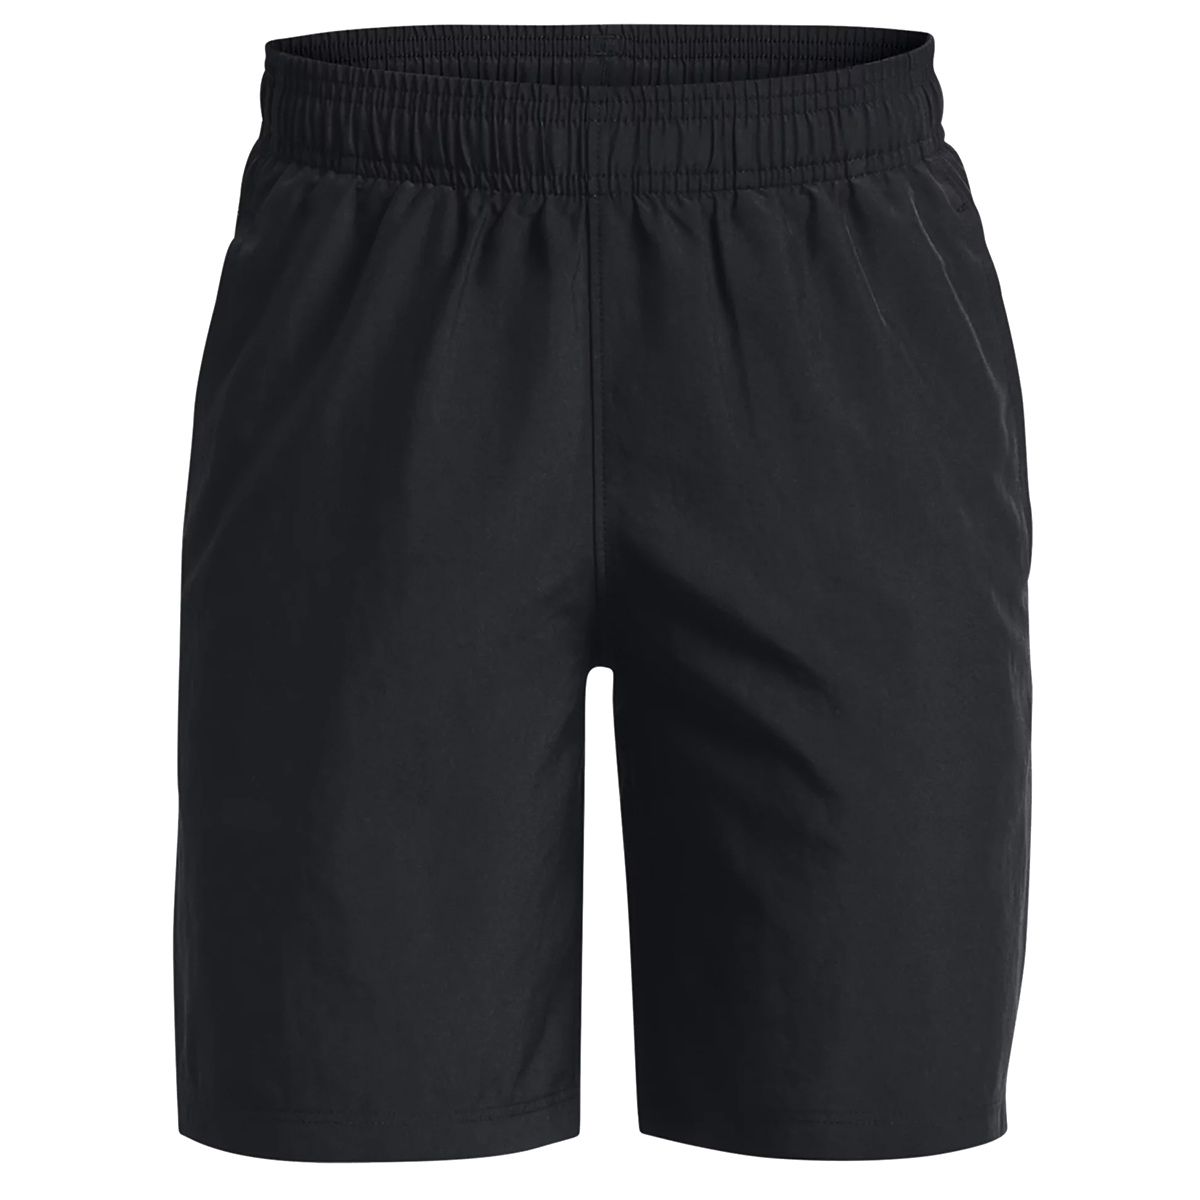 Under Armour Woven Graphic Boys Shorts 1370178-003